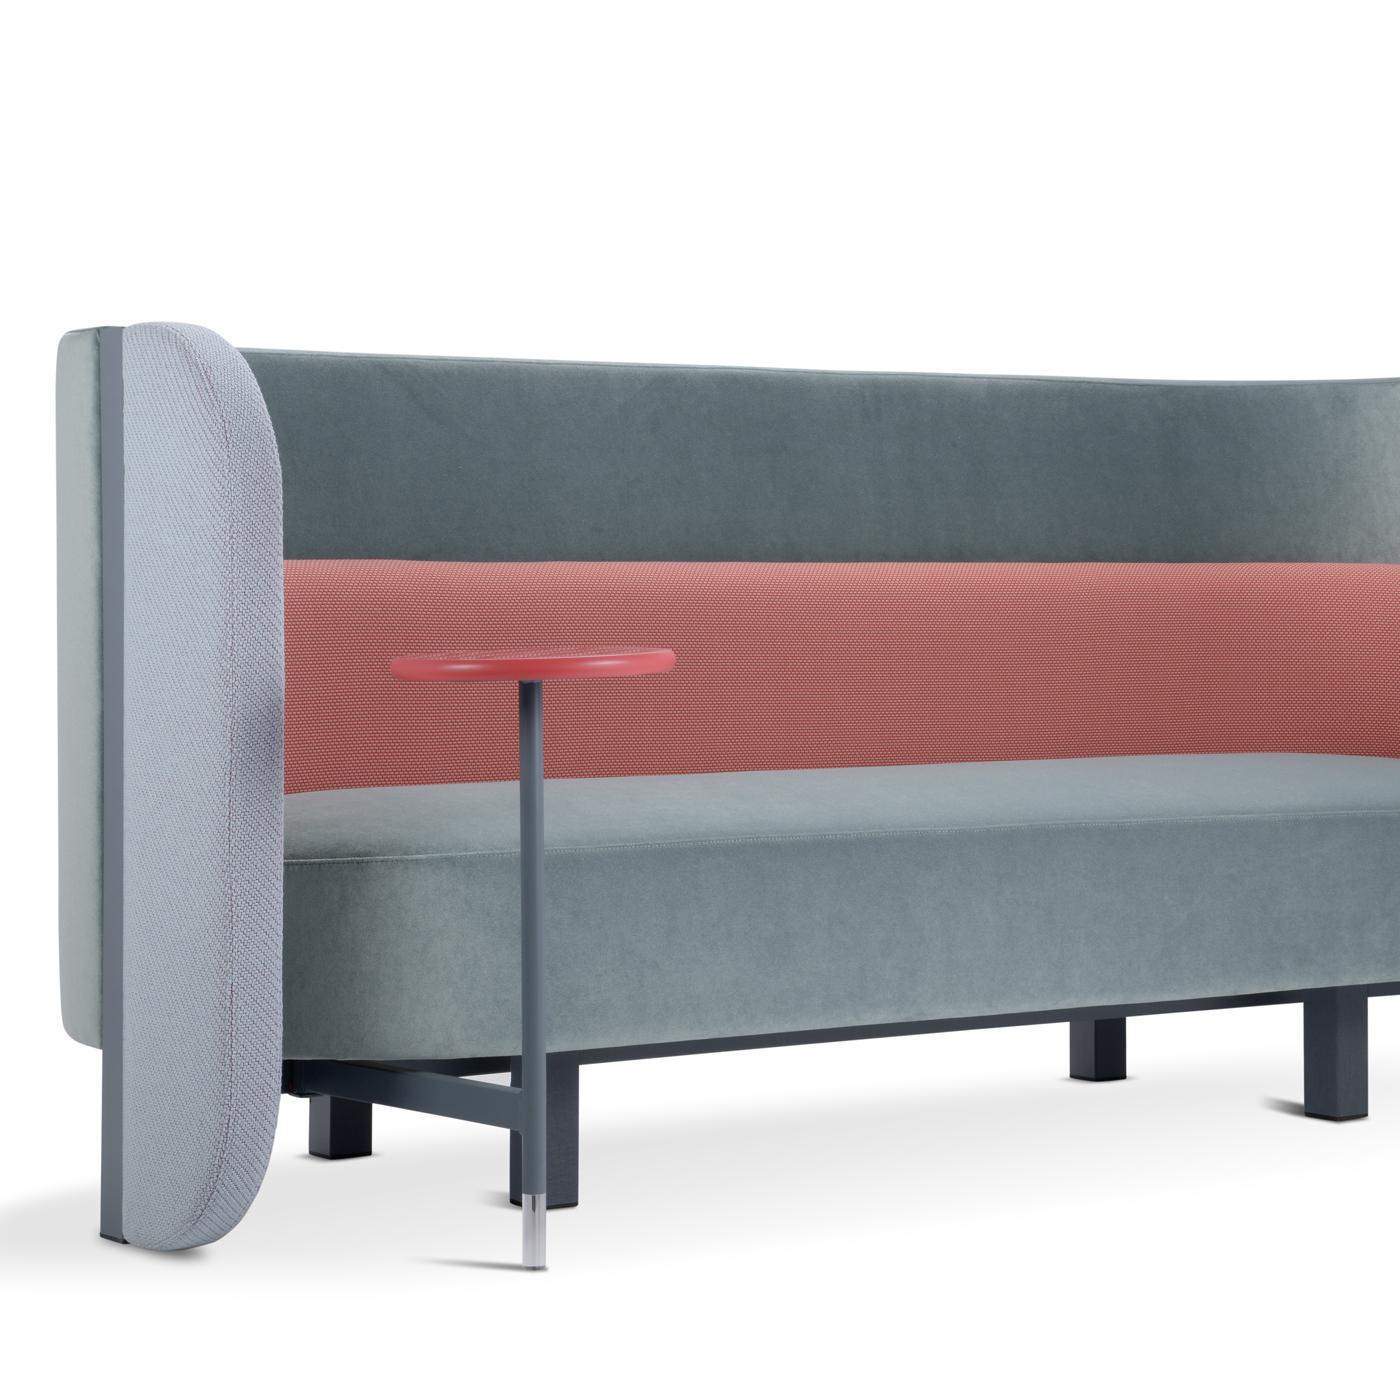 Multifunctional sofa that allows you to relax or work due to the practical little table and the USB ports for your mobile devices. The enveloping shape, characterized by two wings that close in and protect, is supported by a load-bearing frame in